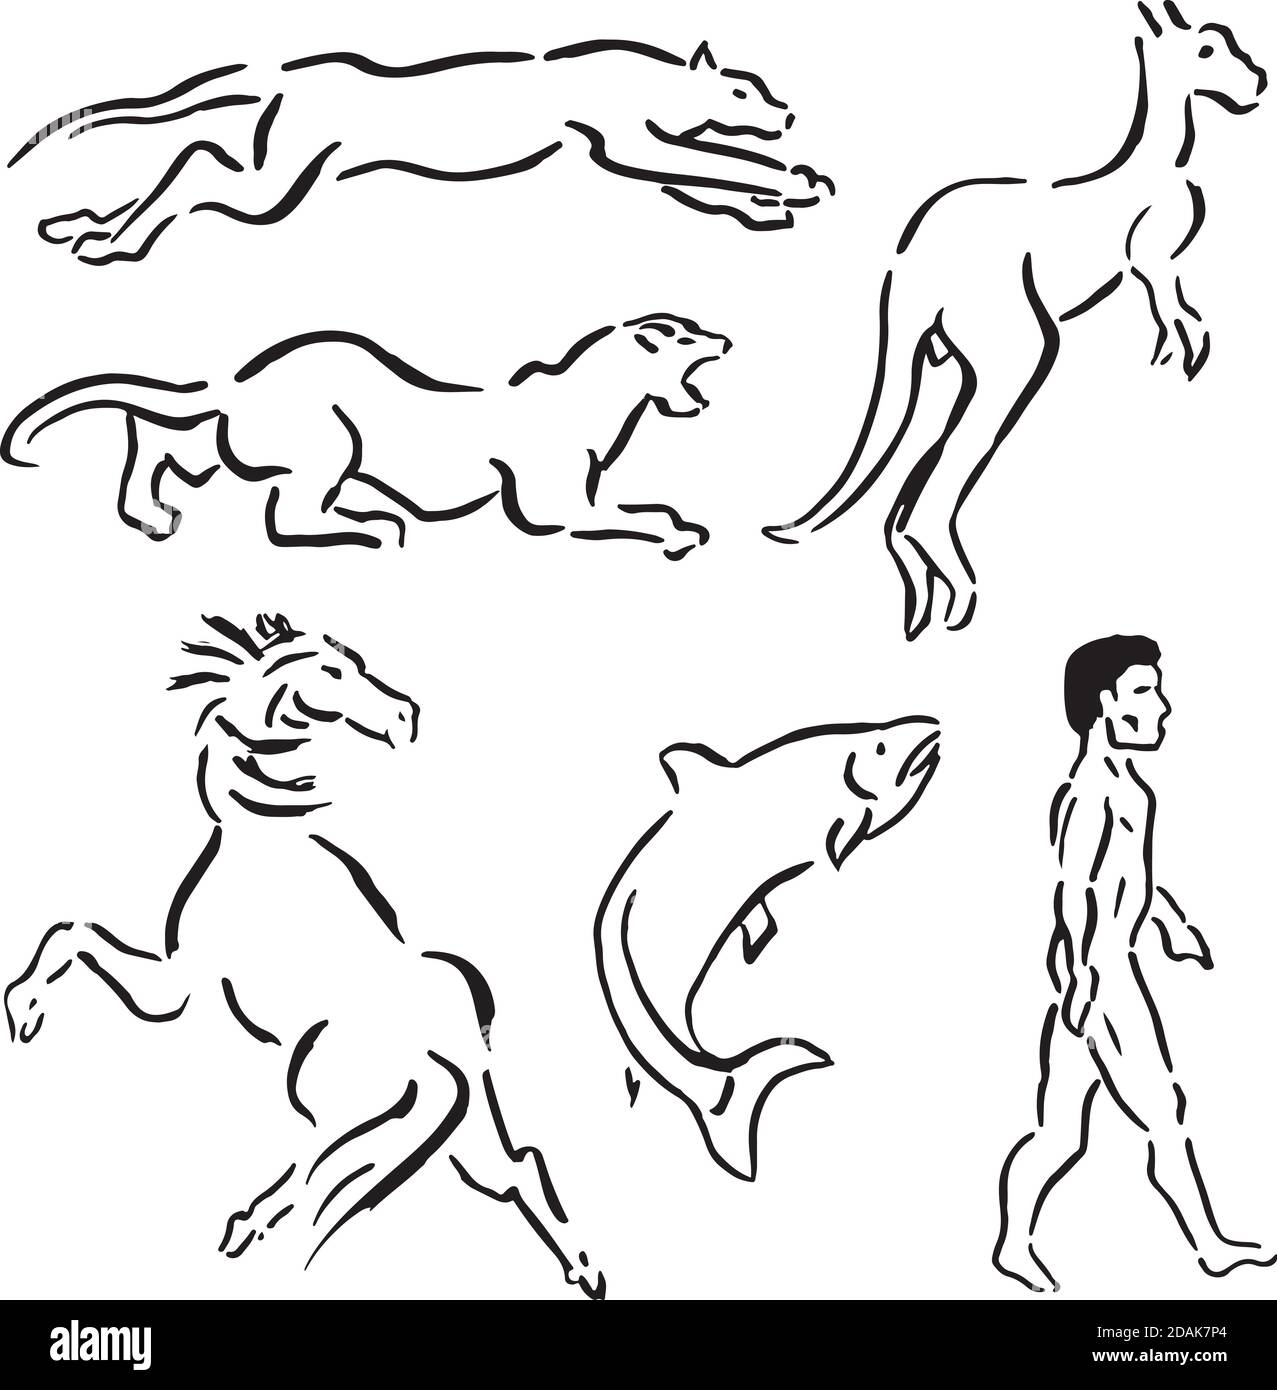 Drawing set of animals like leopard, puma, kangaroo, horse, salmon and a man walking, in ink brush style. Hand drawn and digital retouch. Stock Photo